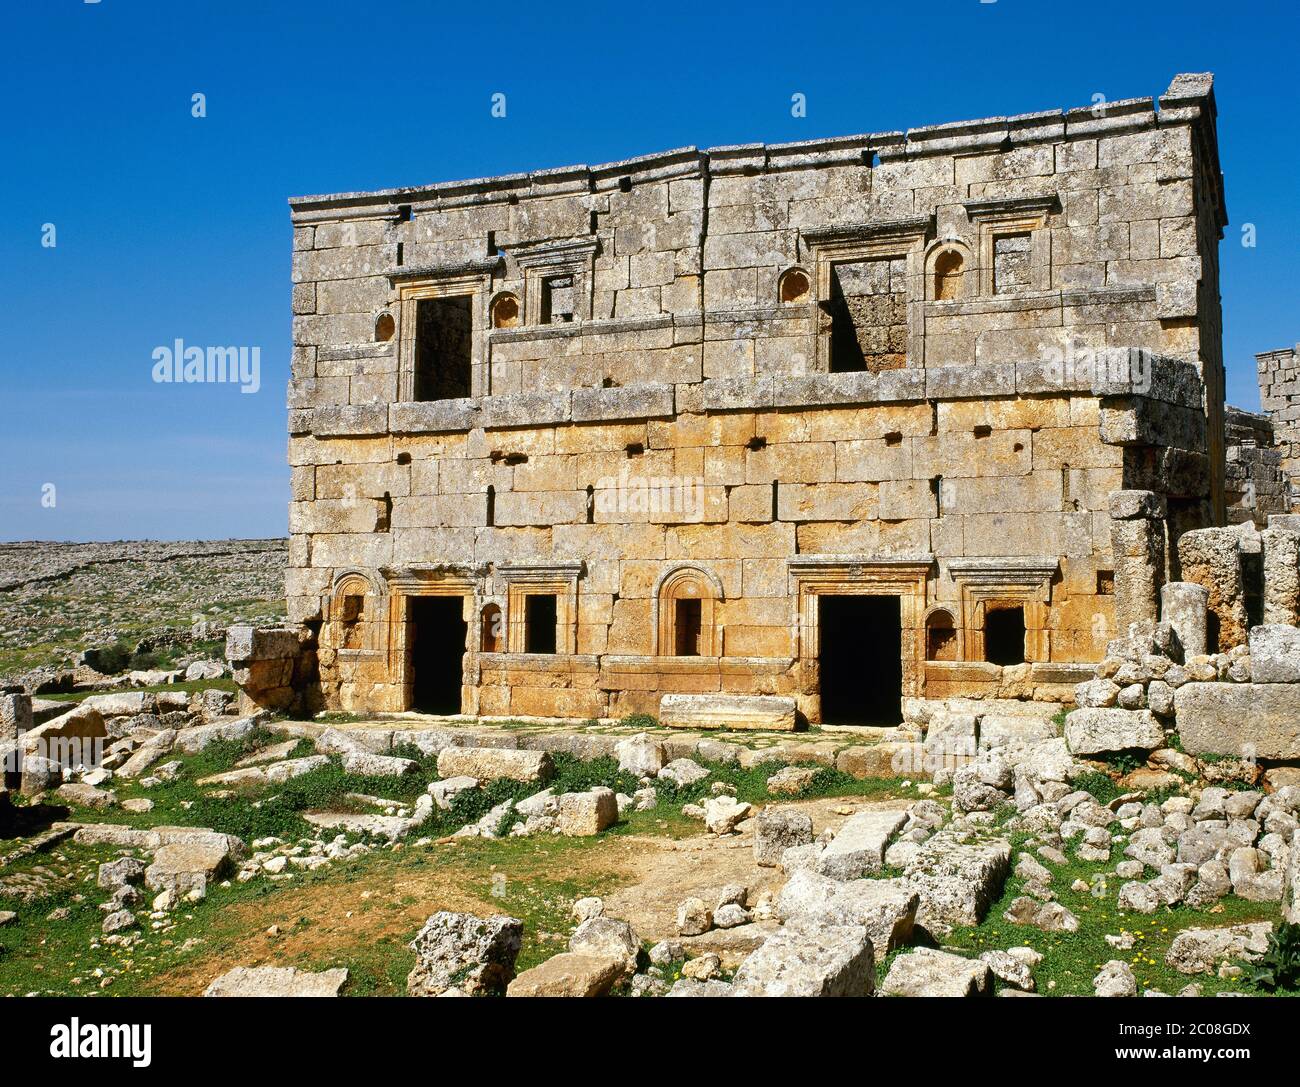 Syria. Dead Cities. Serjilla. Ancient city founded ca. 473 AD and abandoned in 7th century AD. Two storey house ruins. (Photo taken before the Syrian civil war). Stock Photo